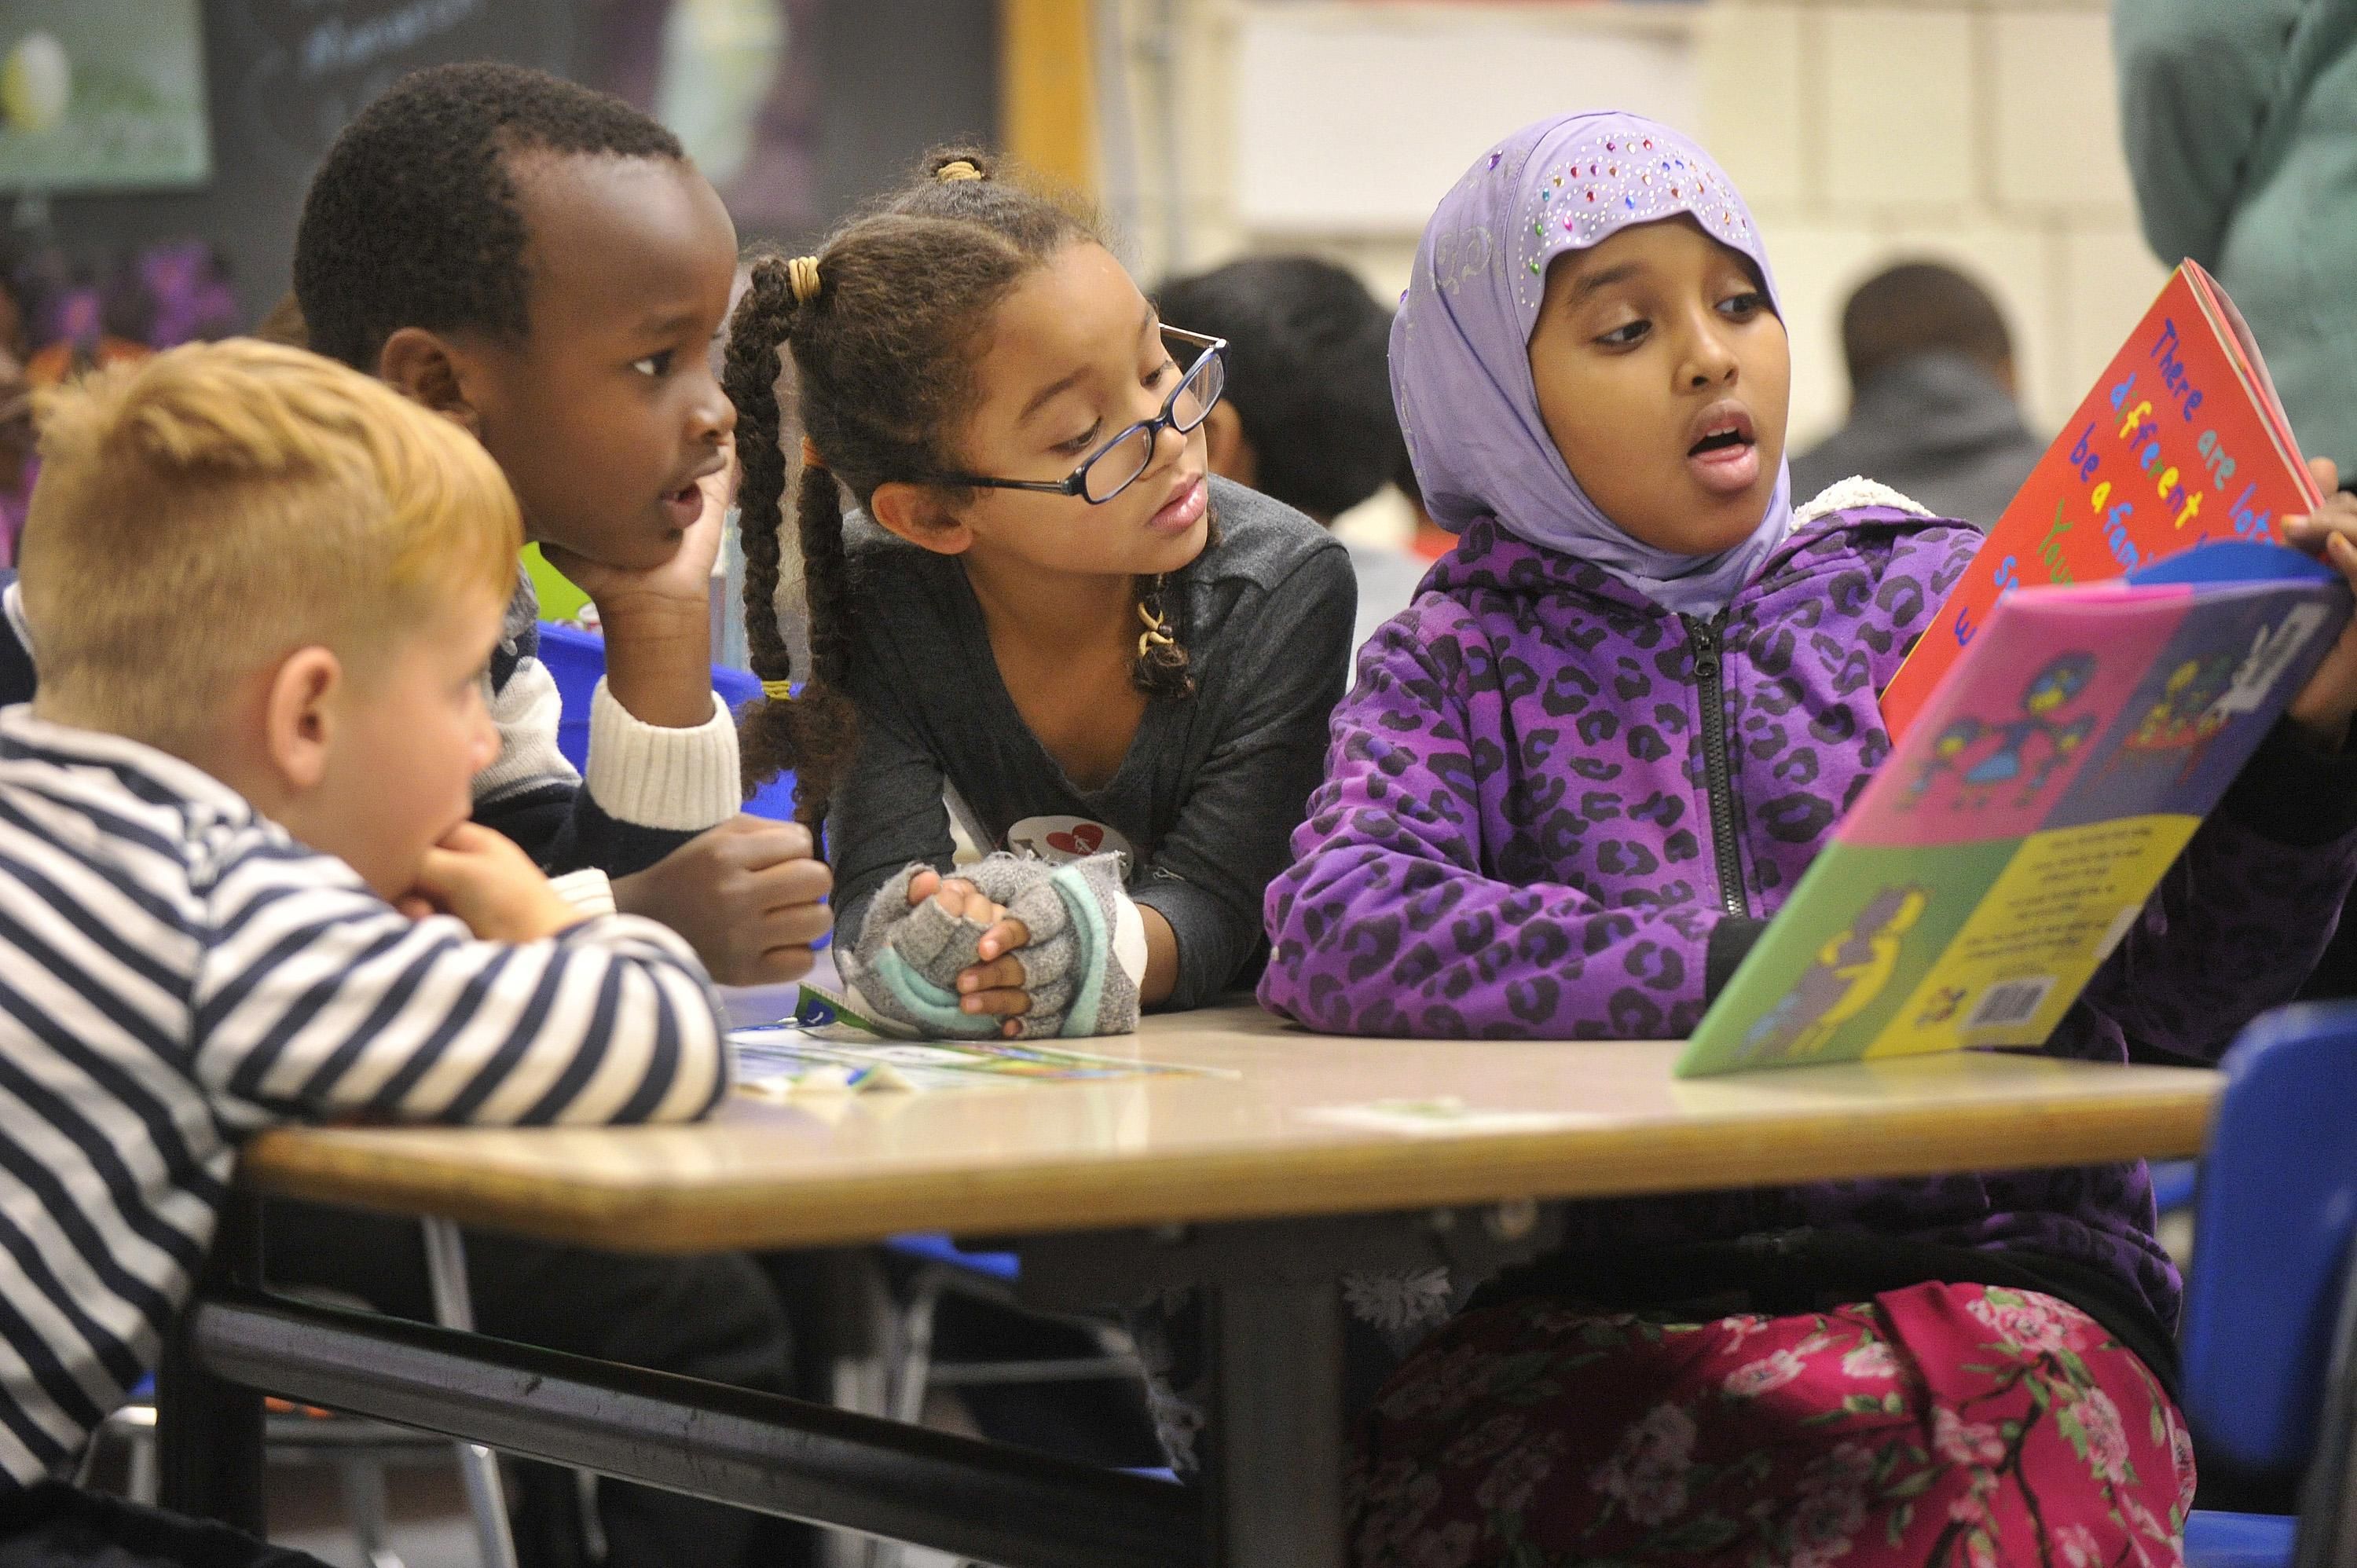 Nine-year-old Nasra Omar reads a book to 1st graders at Riverton Elementary School. The school's mentoring Civil Rights Team, made up of 4th and 5th graders, read books to kindergartners and first graders about civil rights and anti-bias themes in Portland, Maine. (Photo: John Ewing/Portland Portland Press Herald via Getty Images)